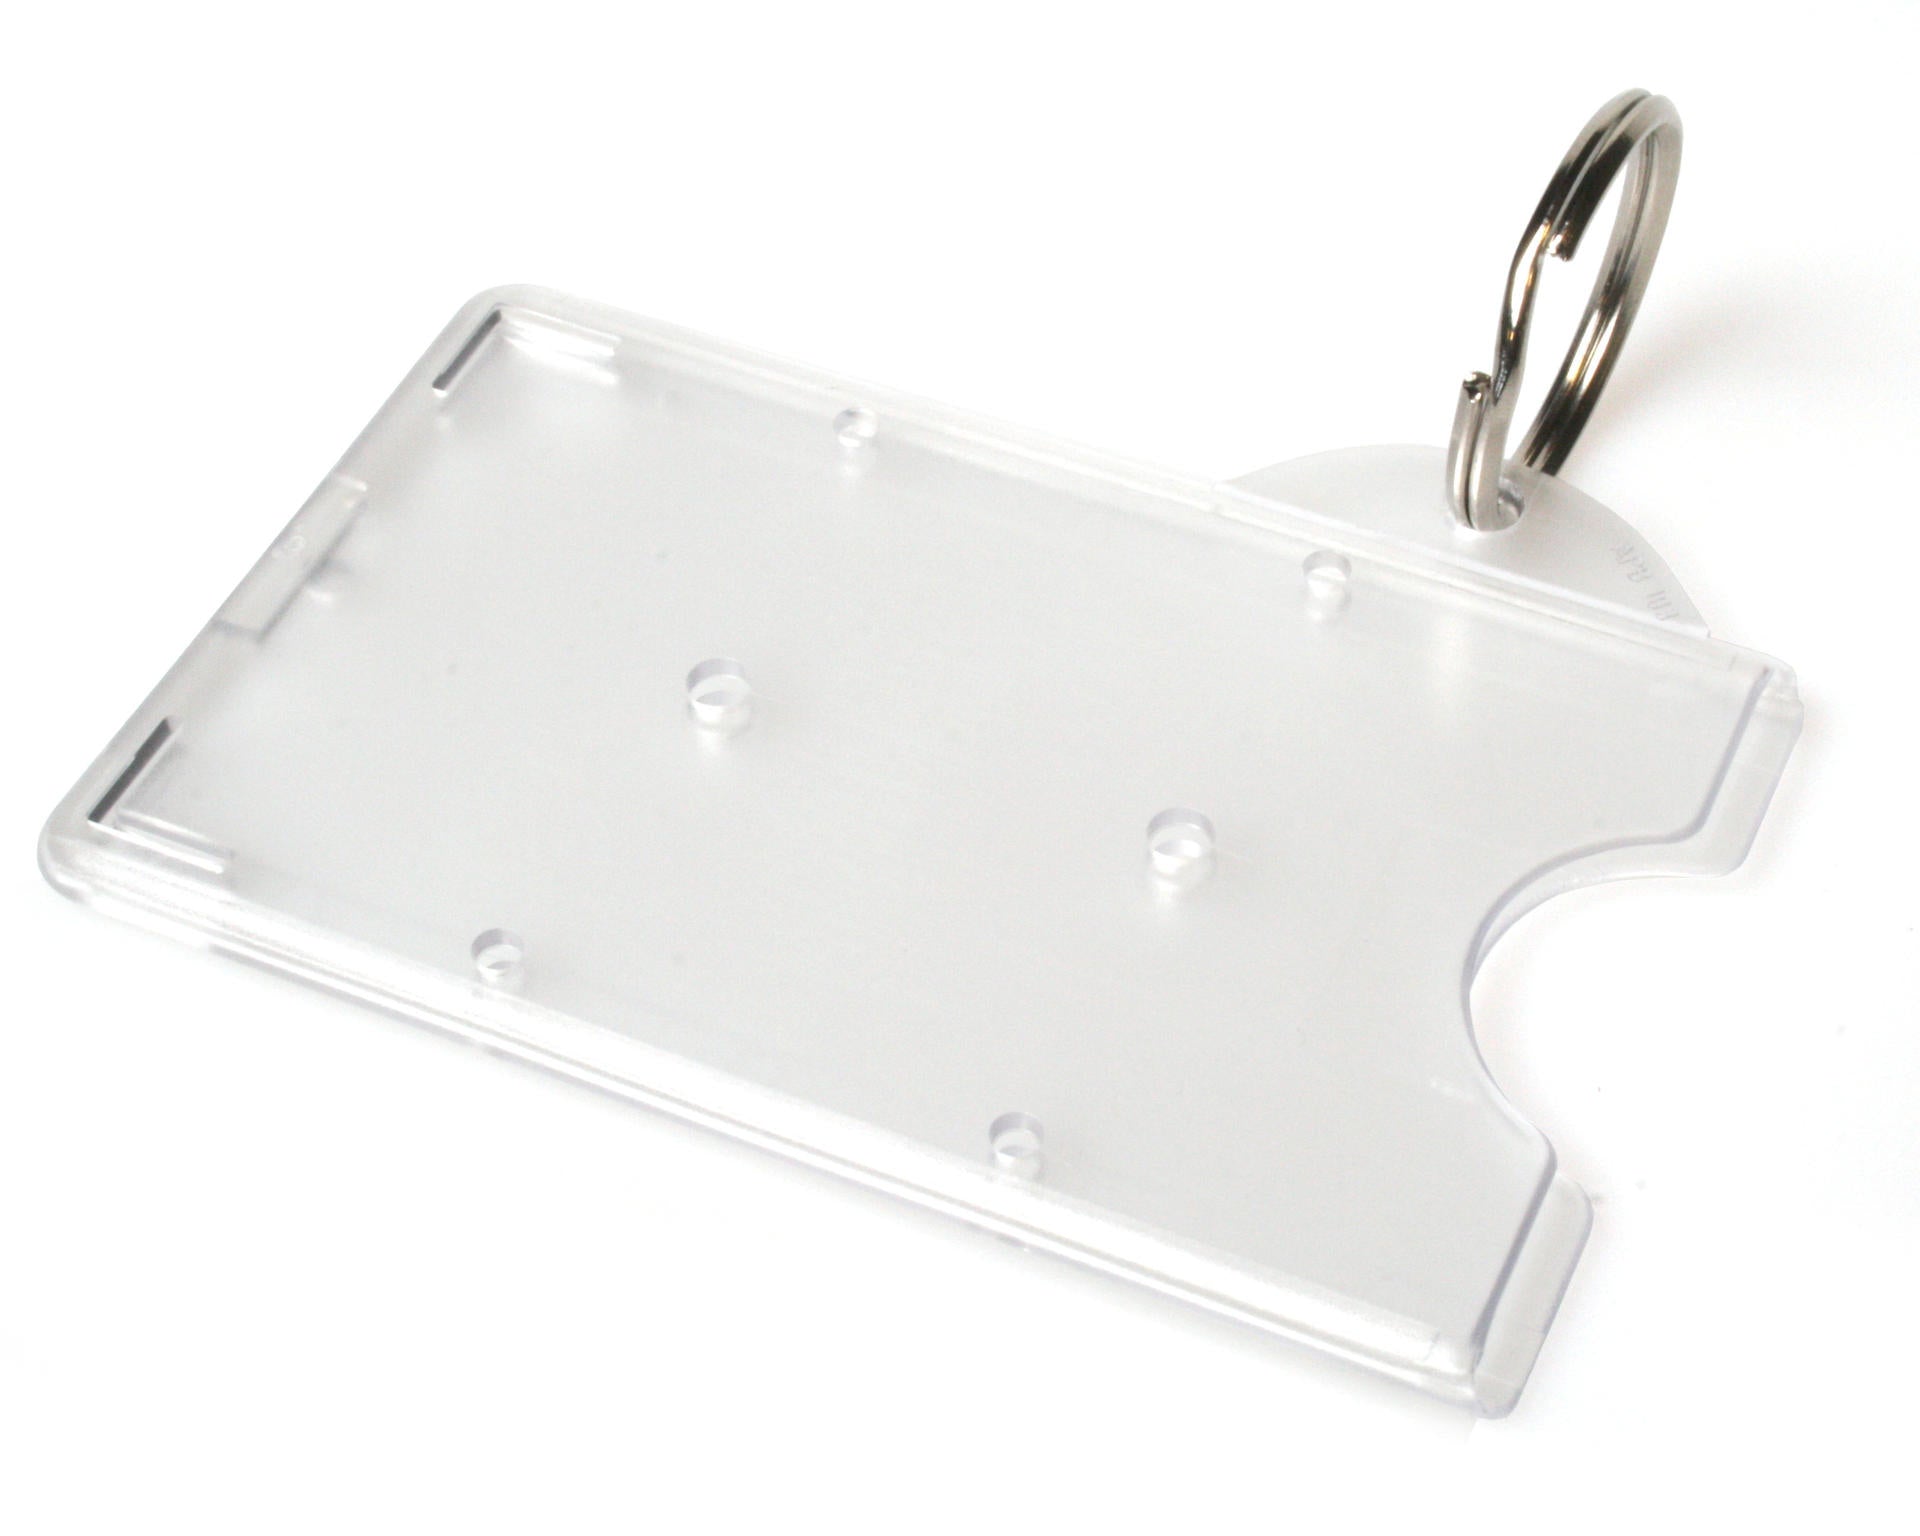 Enclosed Rigid Holders With Key Ring Attachment (Pack of 100)